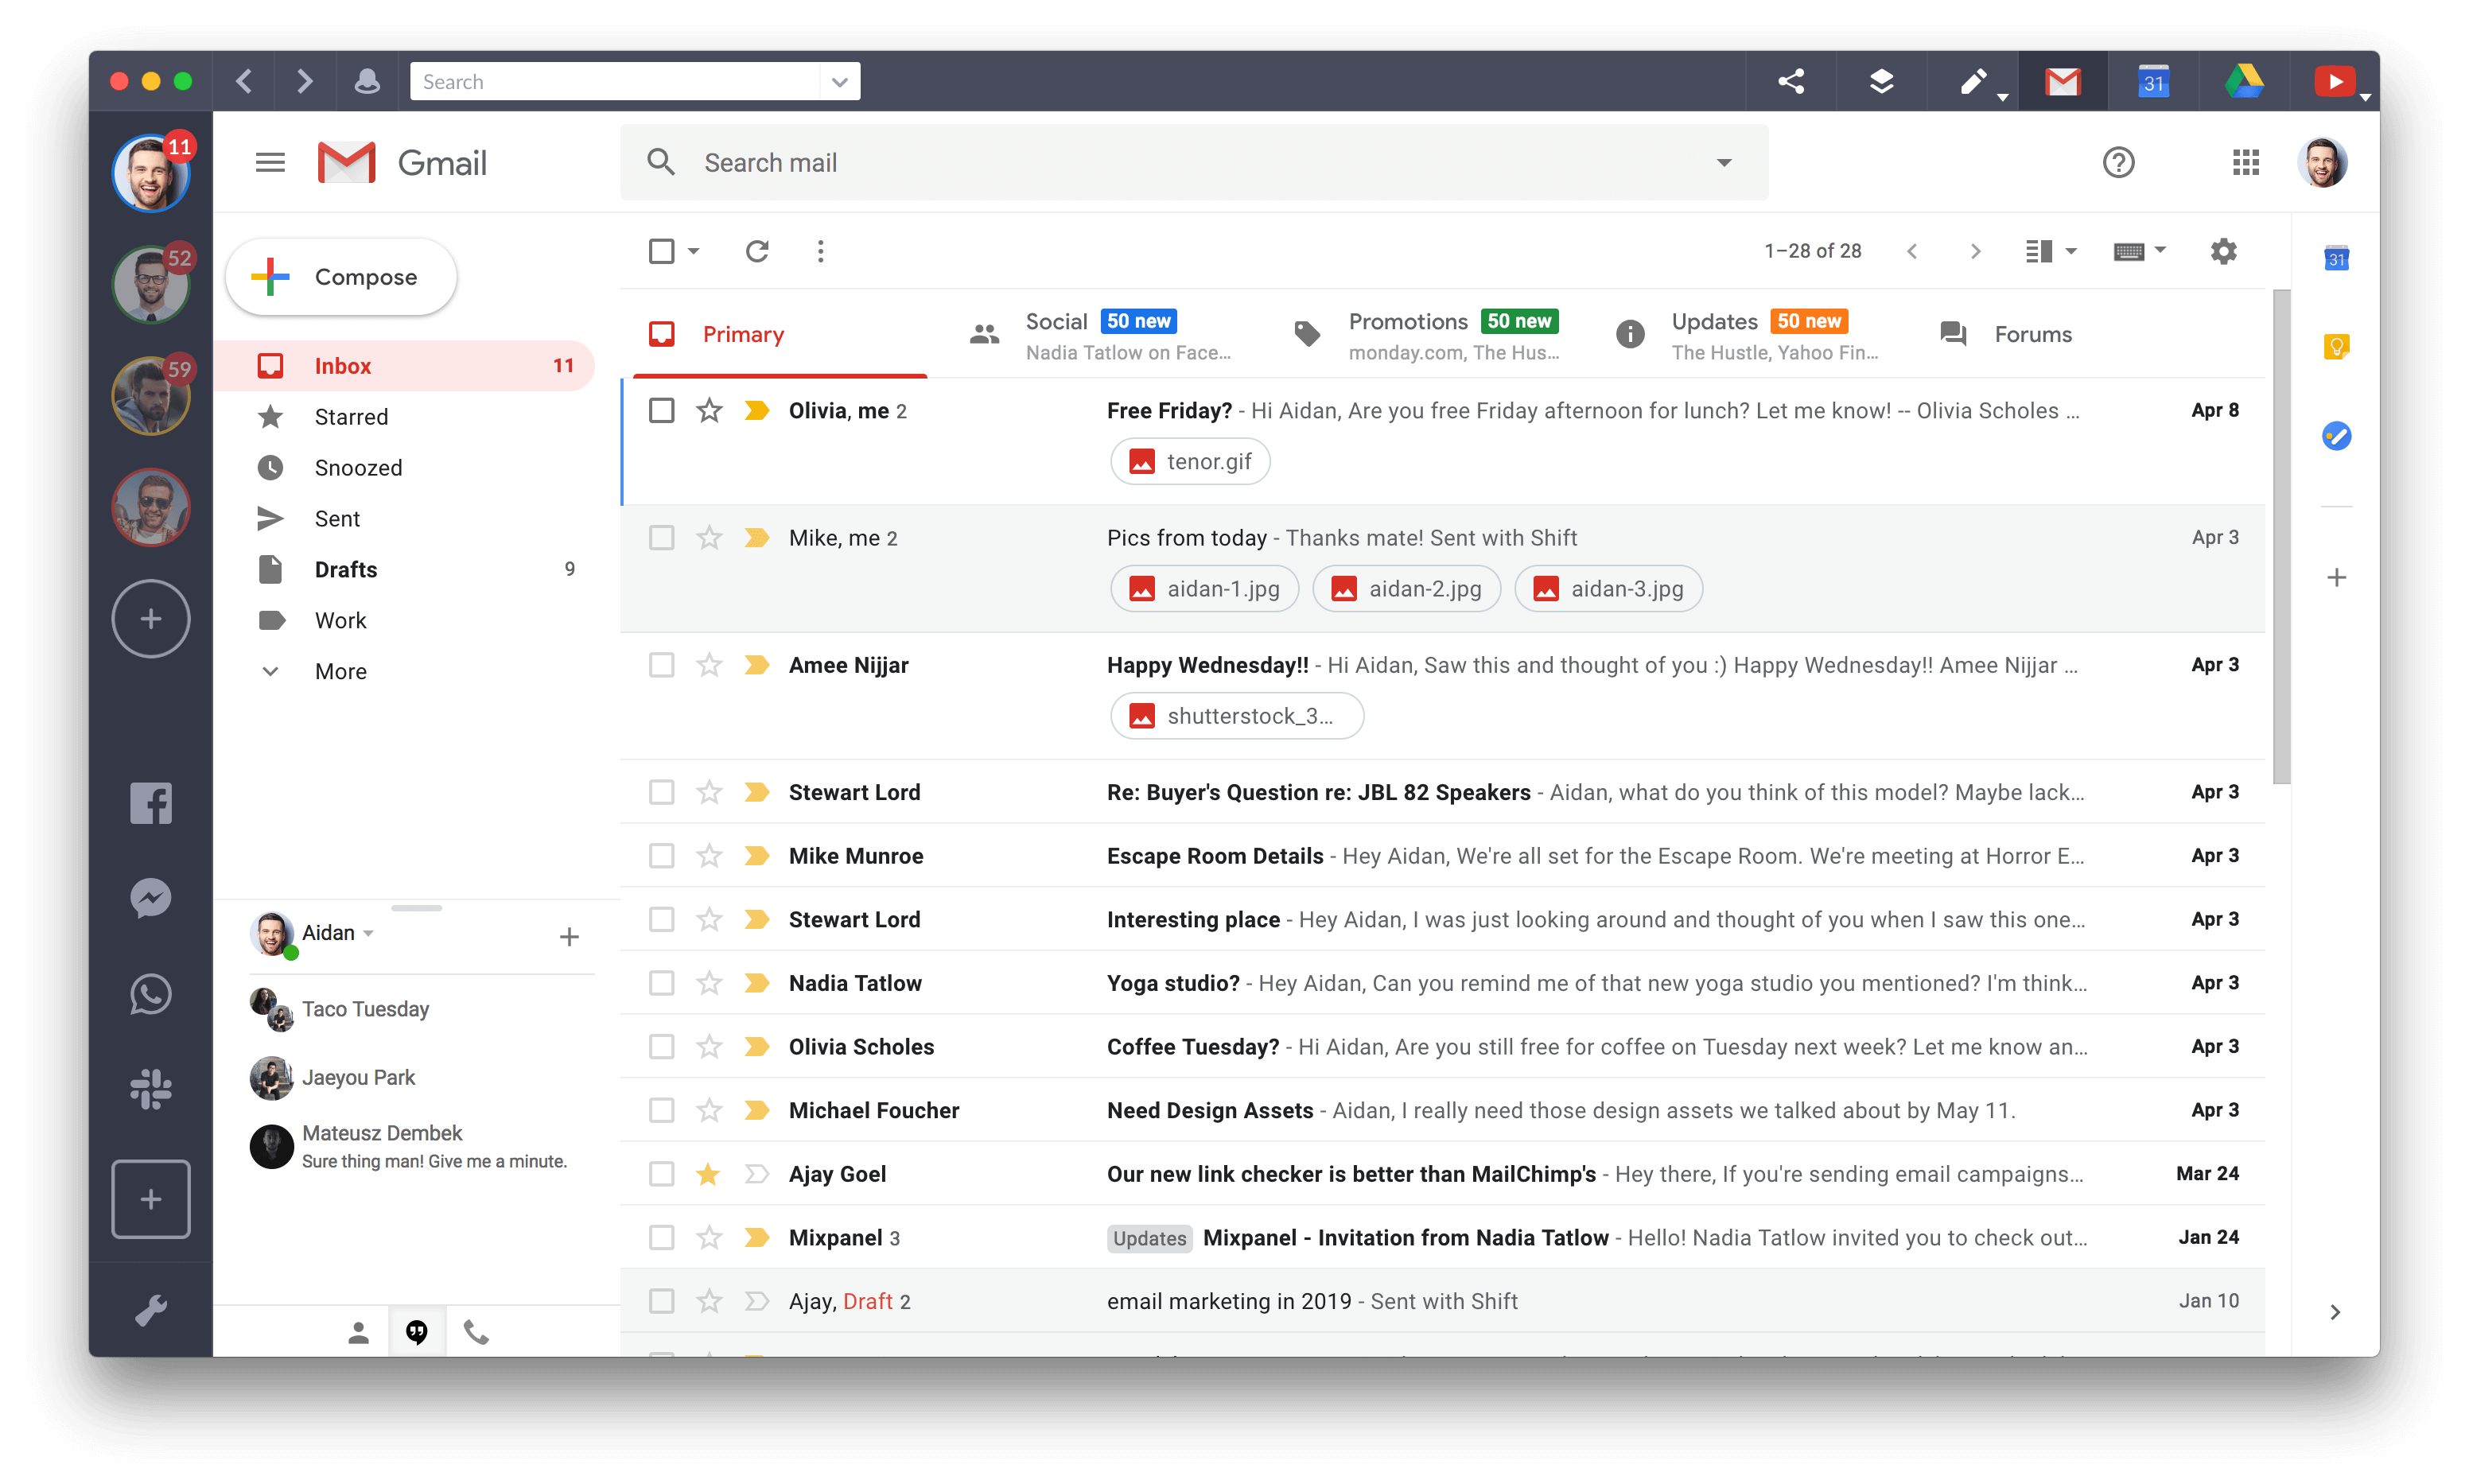 Email management: BlueMail.exe is a powerful email management tool that allows users to efficiently organize and manage their email accounts.
Multiple account support: Users can add and manage multiple email accounts from various providers, such as Gmail, Outlook, Yahoo, and more, all in one place.